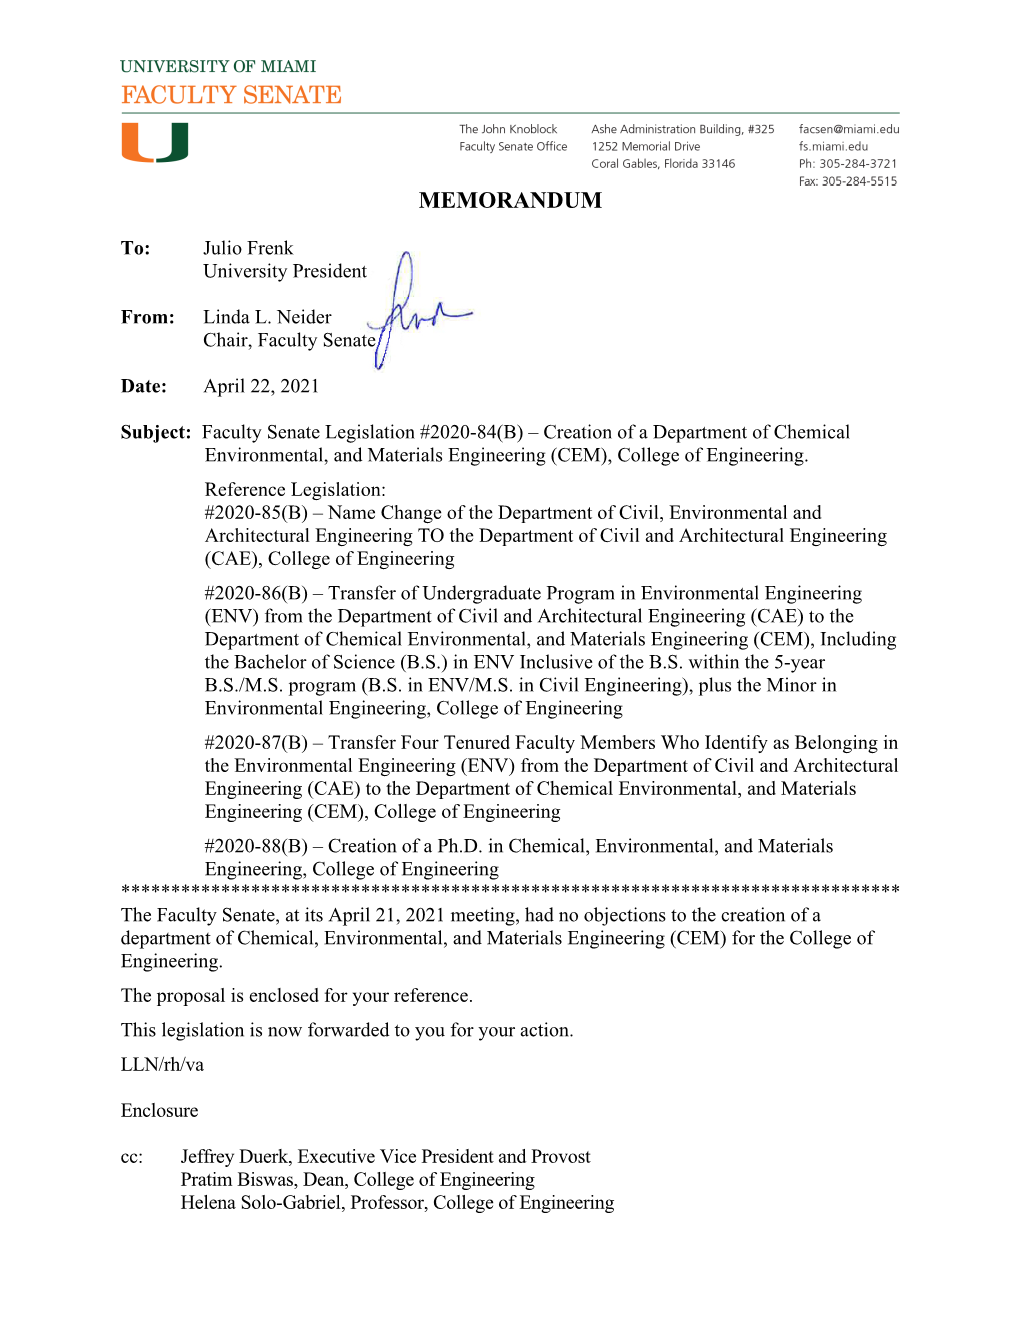 2020-84(B) – Creation of a Department of Chemical Environmental, and Materials Engineering (CEM), College of Engineering